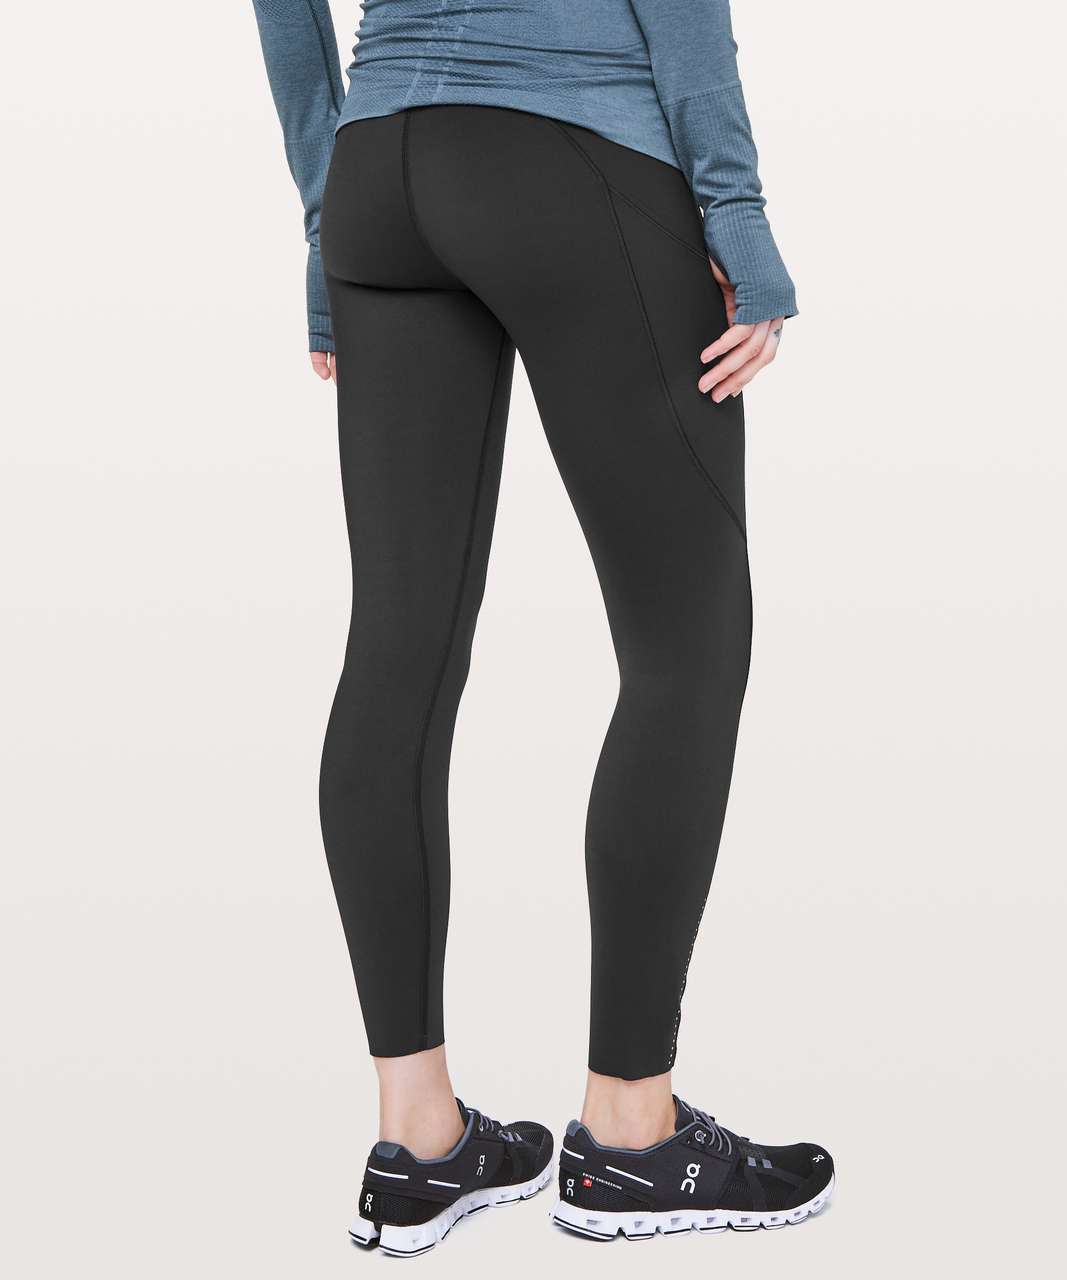 Lululemon Fast and Free 7/8 Tight ll Nulux 25”Size 4 Interfaced